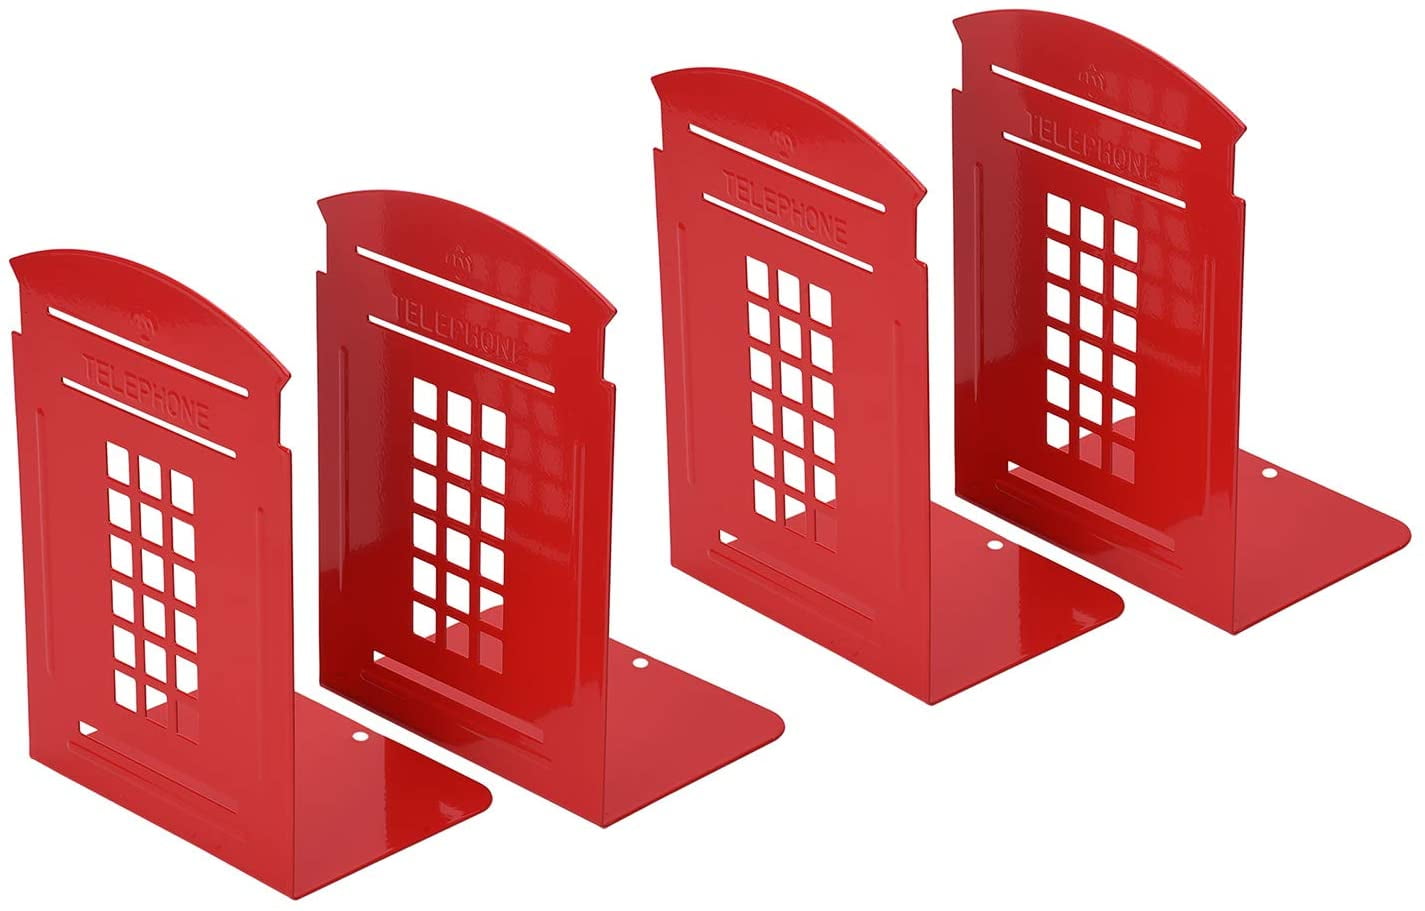 Non Skid Sturdy Telephone Booth Decorative Gift for Bookshelf Office School Library Non-Slip Bookends Heavy Metal